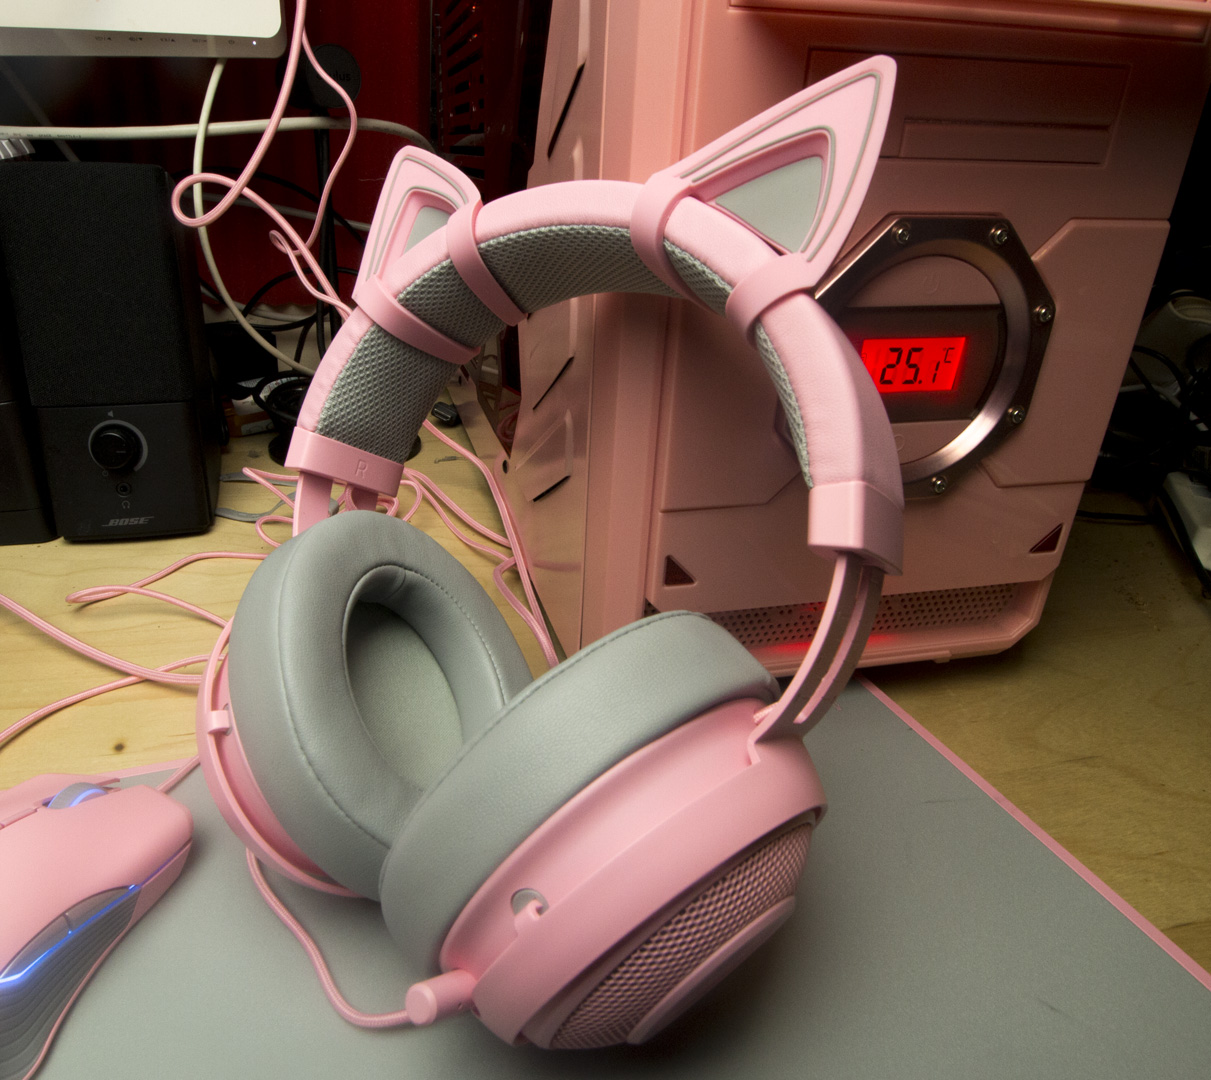 My Quest For All-Pink Gaming Gear Is Almost At An End